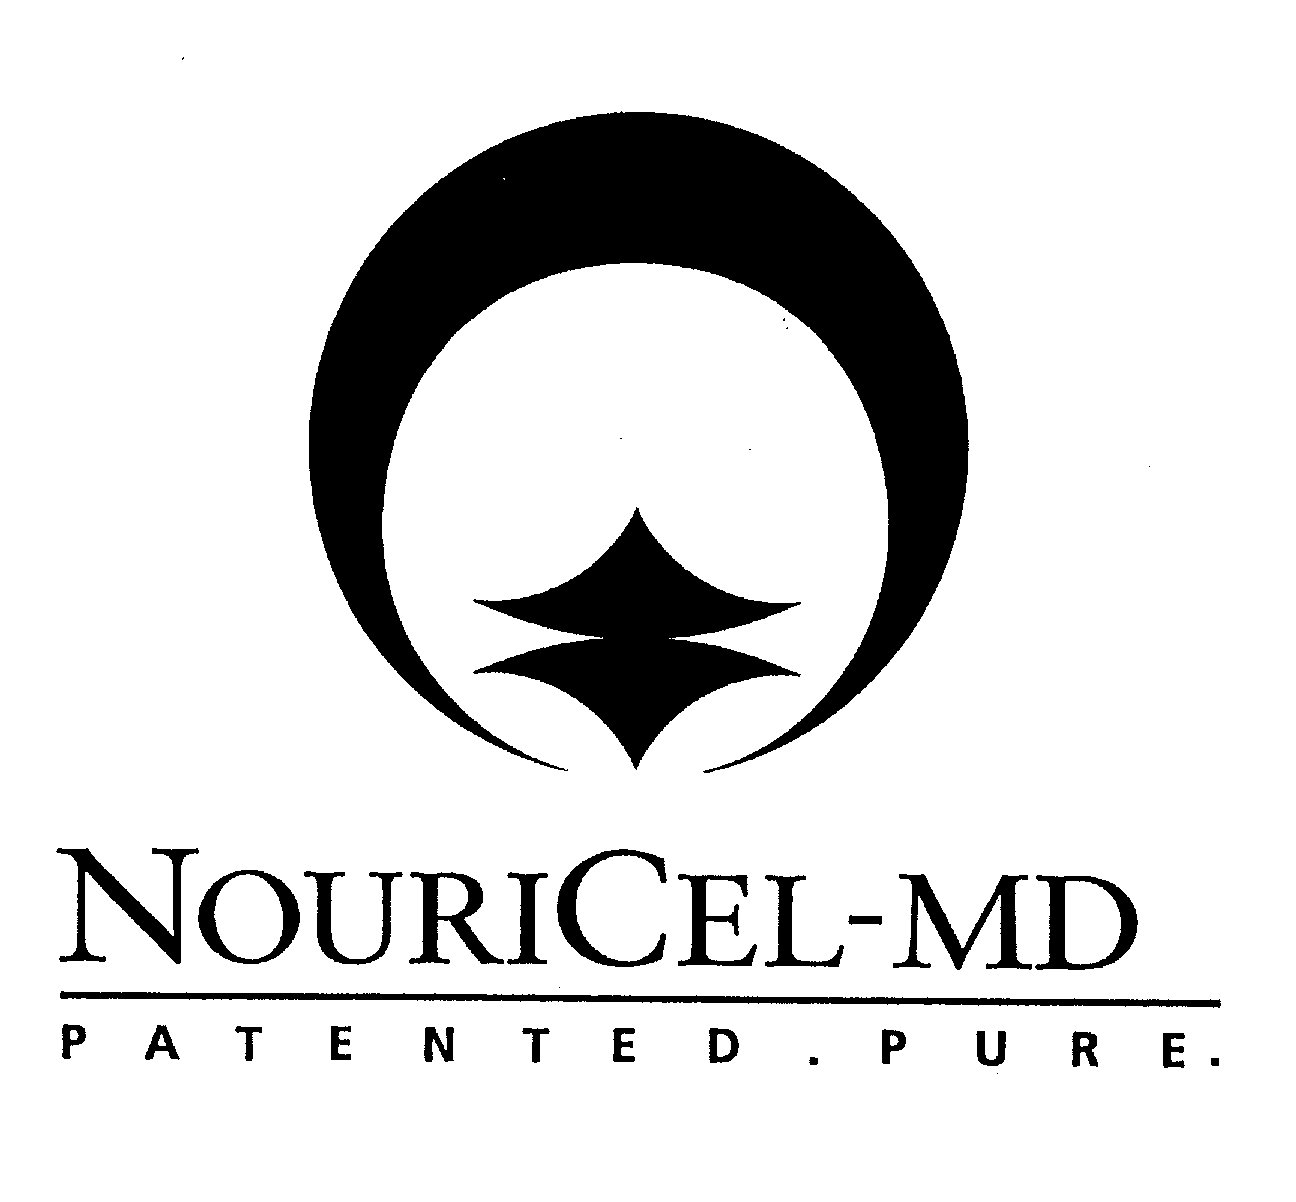  NOURICEL-MD PATENTED. PURE.